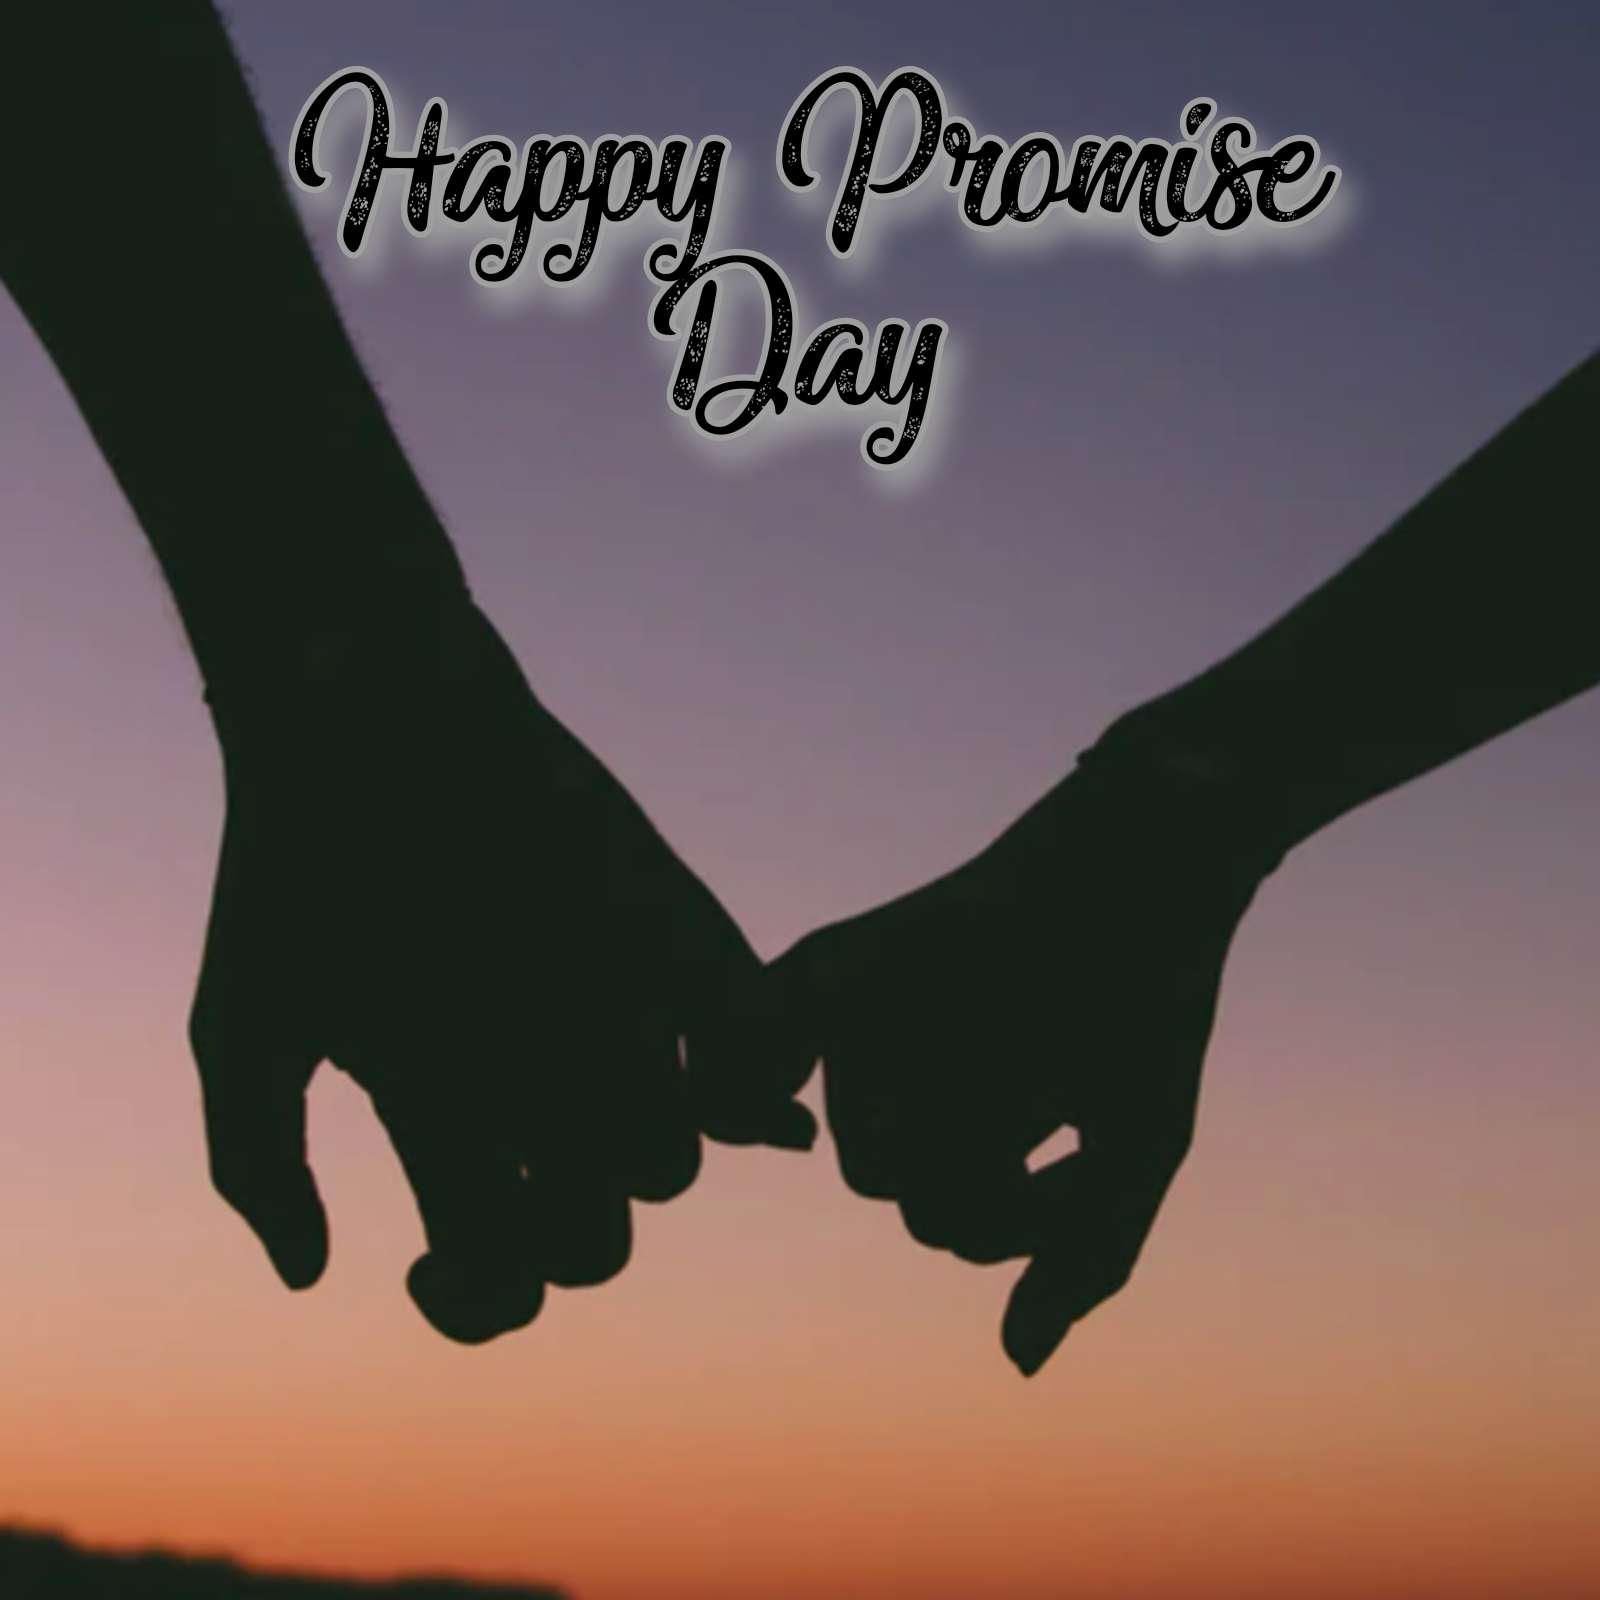 Promise Day Images For Boyfriend Download